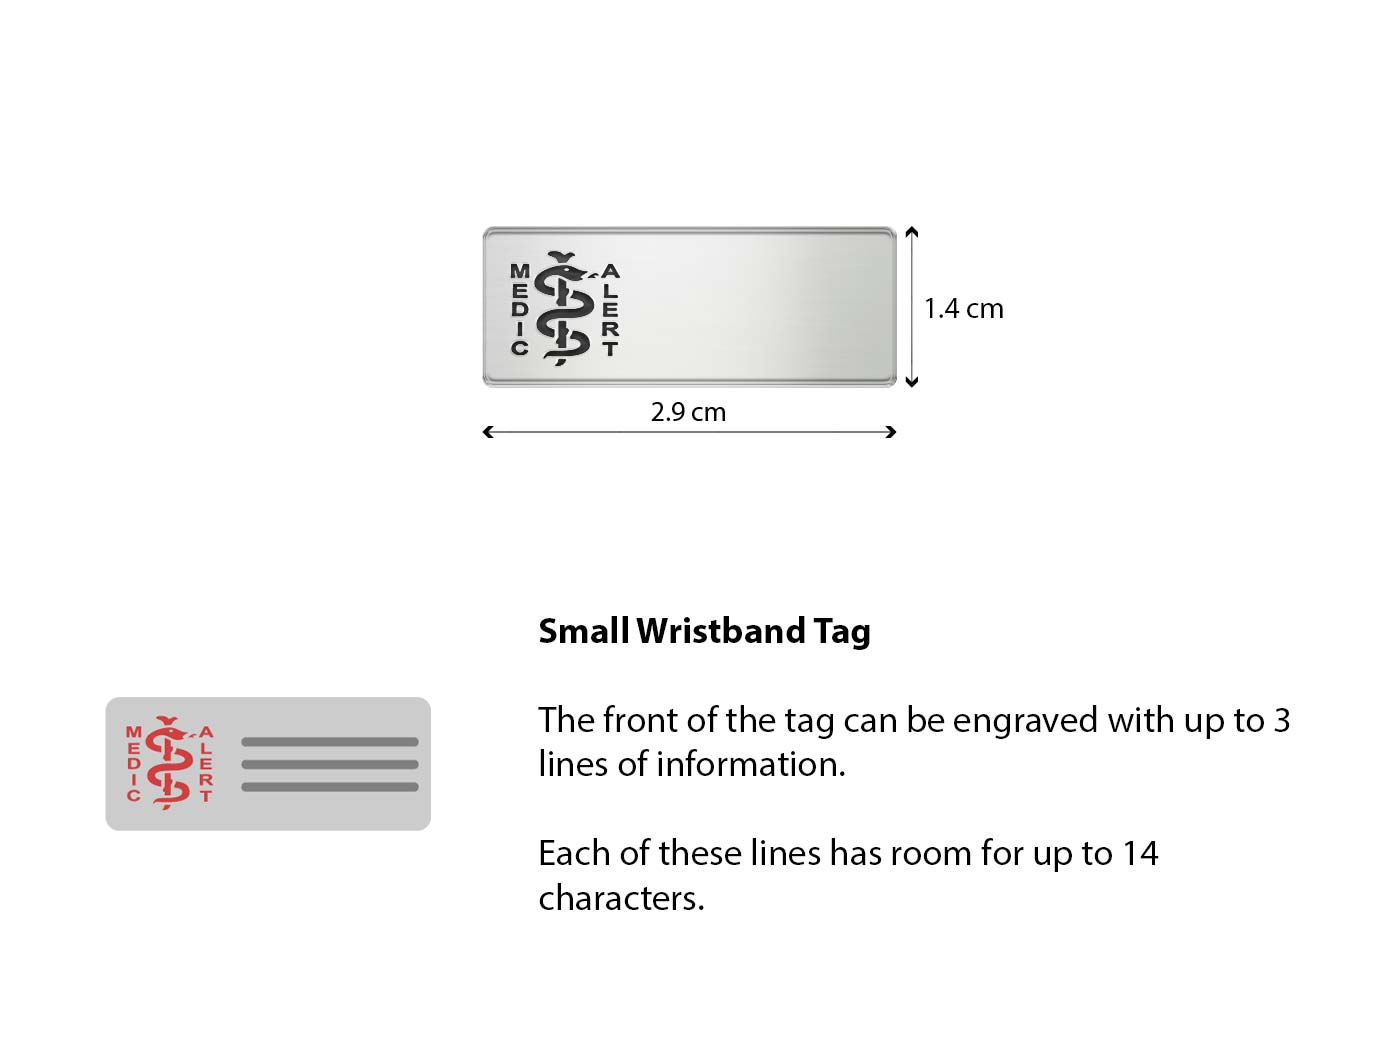 Diagram of the MedicAlert stainless steel small wristband tag disc with measurements and descriptions of the engraving specifications